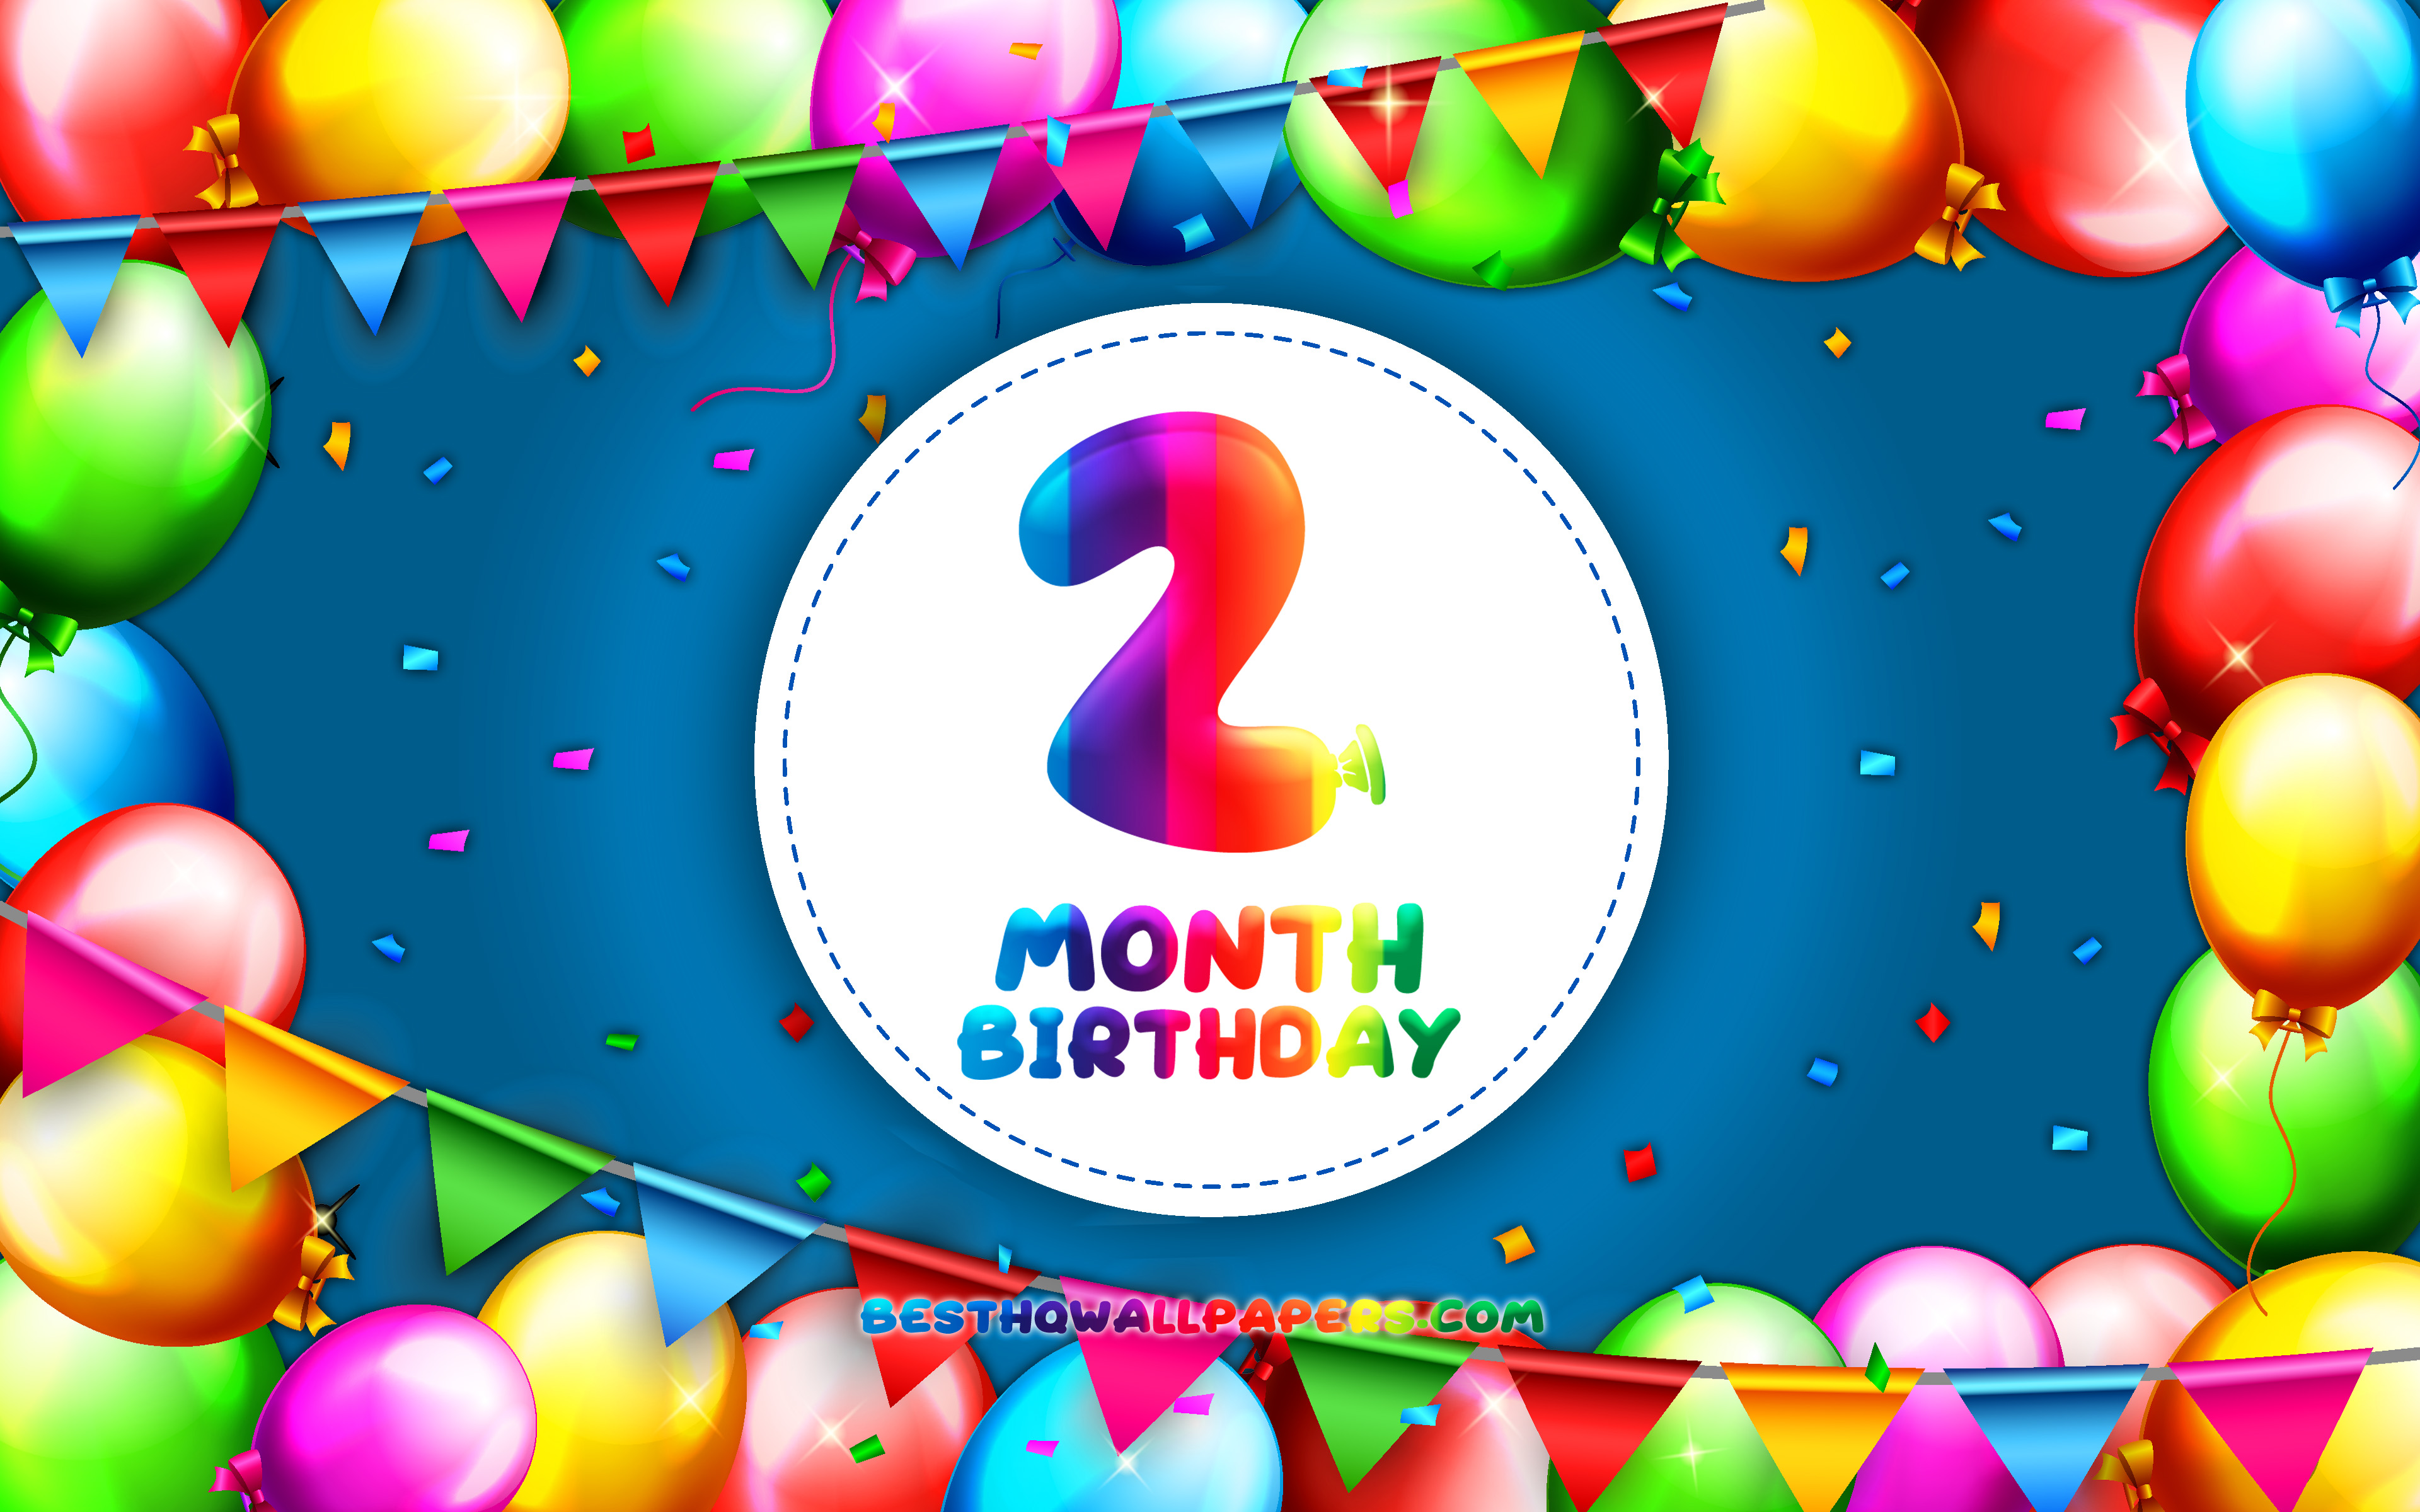 Download wallpaper Happy 2nd Month birthday, 4k, colorful balloon frame, 2 month of my boy, blue background, Happy 2 Month Birthday, creative, 2nd Month Birthday, Birthday concept, 2 Month Son Birthday for